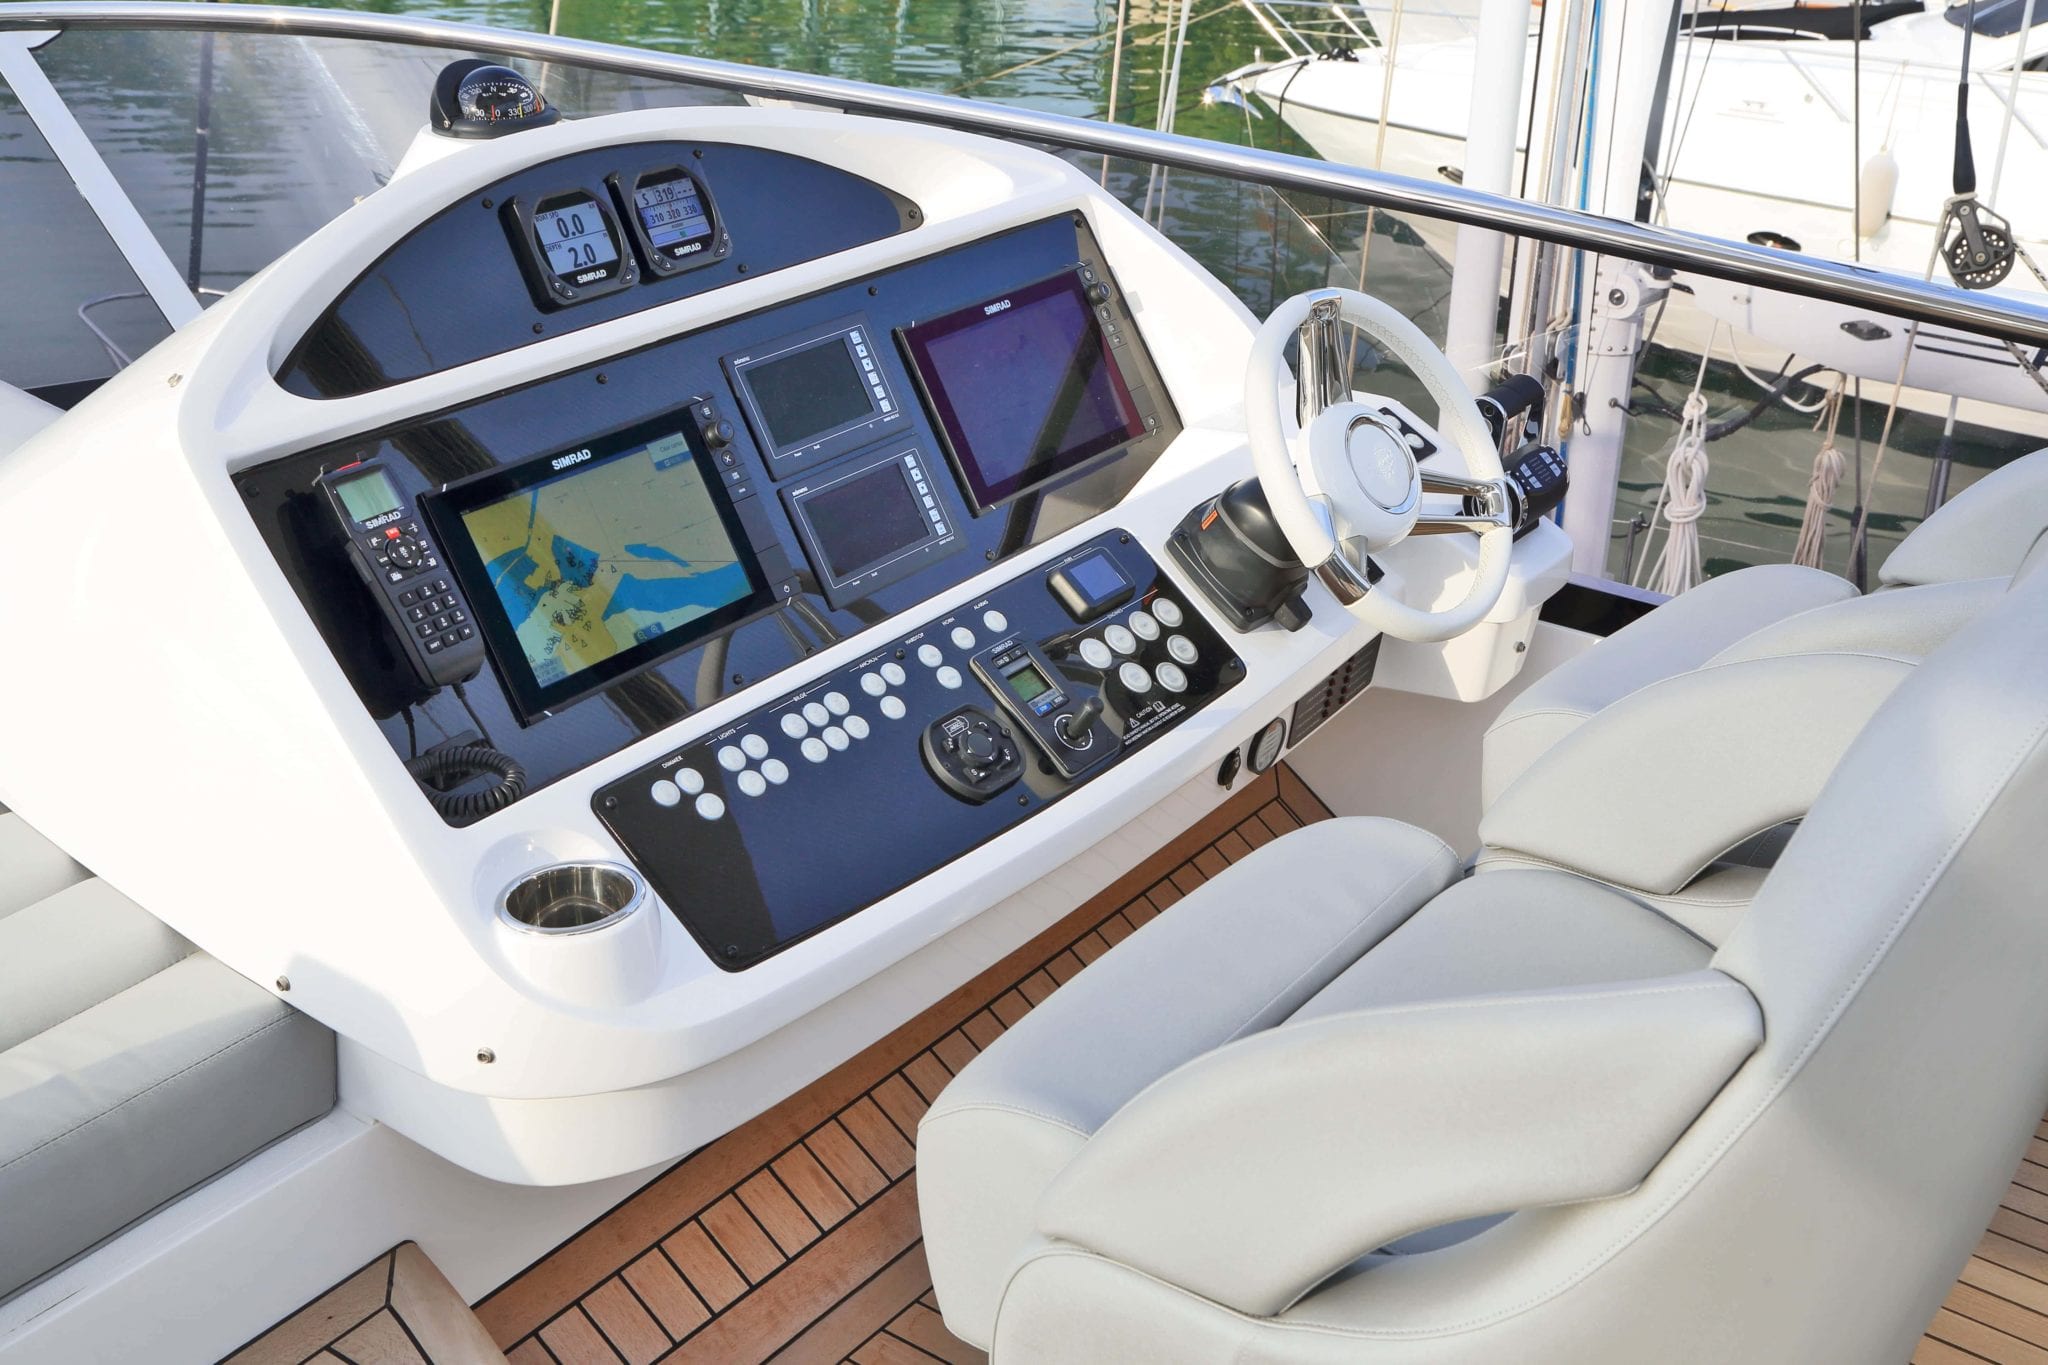 A look at the yachts bridge here on the sunseeker.